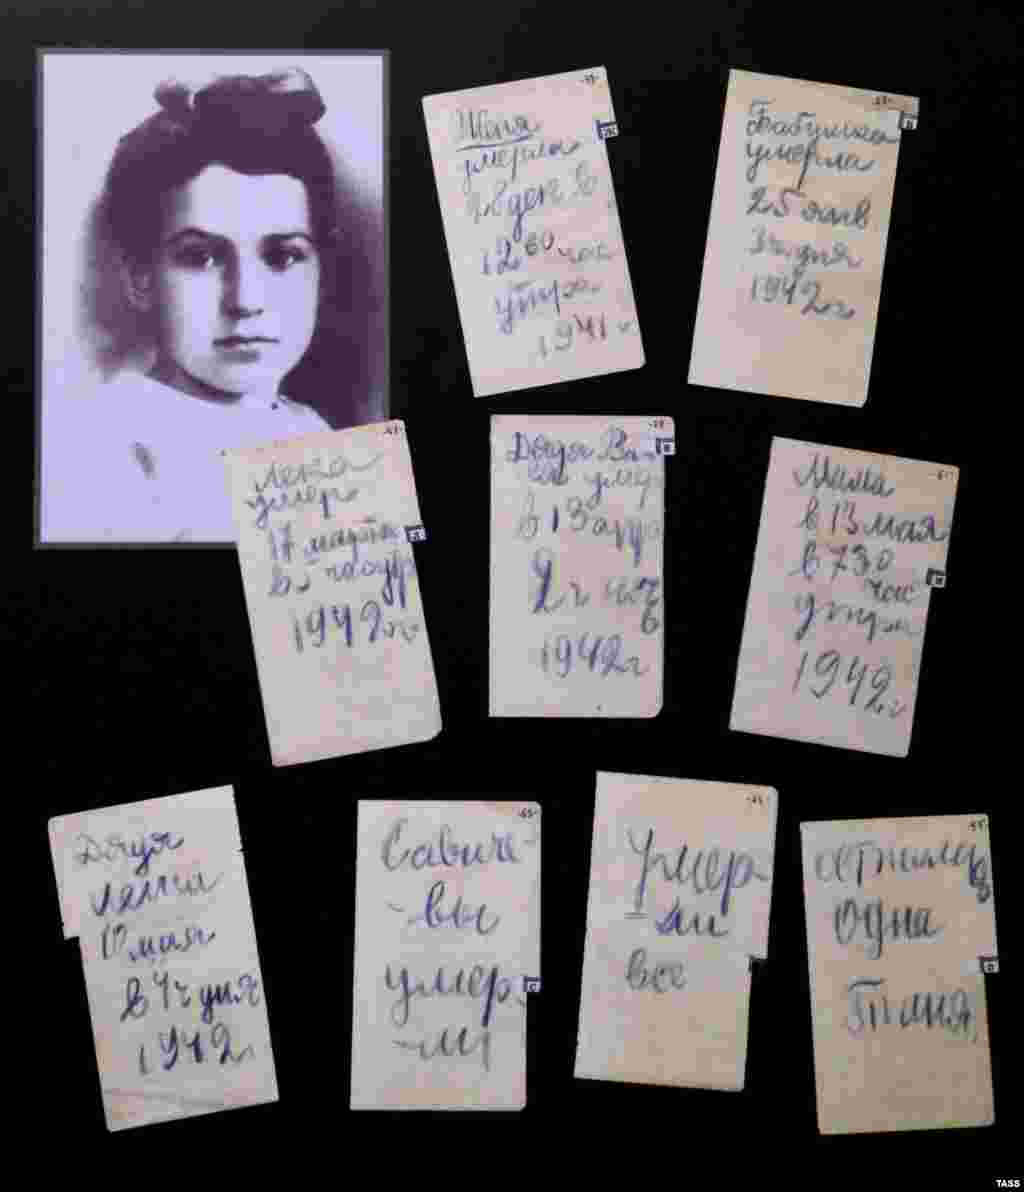 These pages are from the diary of Tanya Savicheva, a girl who chronicled the passing -- one by one -- of her six family members as they died during the Leningrad siege. The first entry (top left) marks her sister Zhenya&#39;s death on &quot;December 28 at noon, 1941.&quot; The last two pages at bottom right say, &quot;everyone is dead.... Only Tanya is left.&quot; She died soon afterward from intestinal tuberculosis.